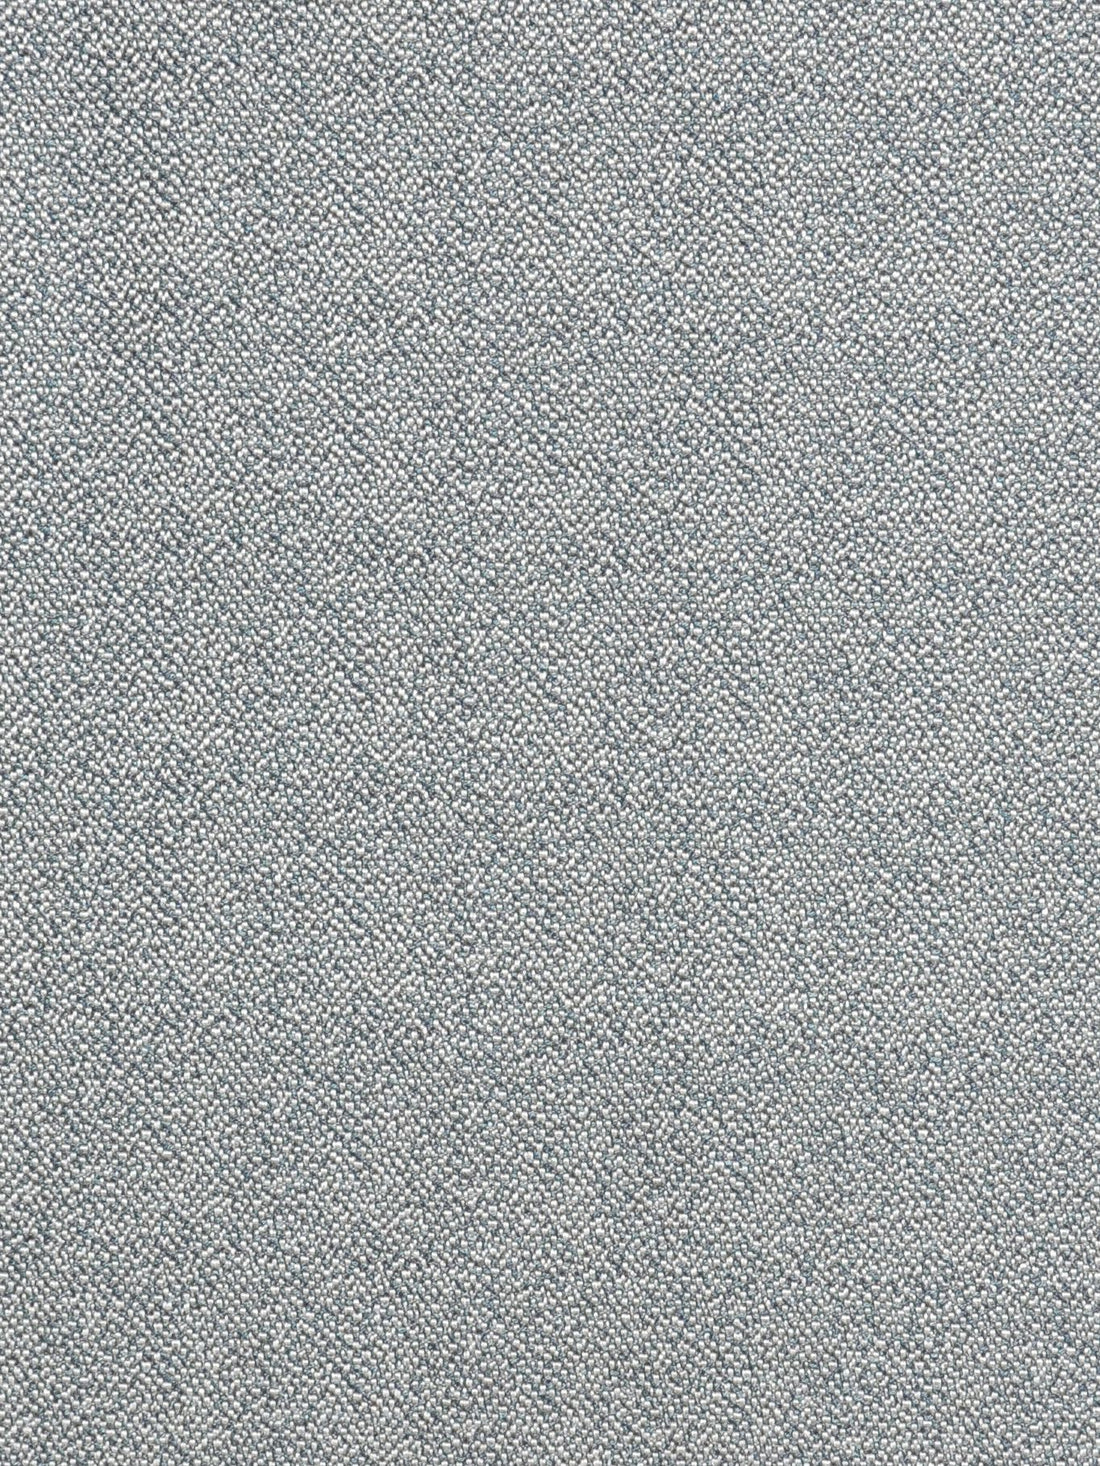 Pebble Texture fabric in bluestone color - pattern number SC 000327139 - by Scalamandre in the Scalamandre Fabrics Book 1 collection